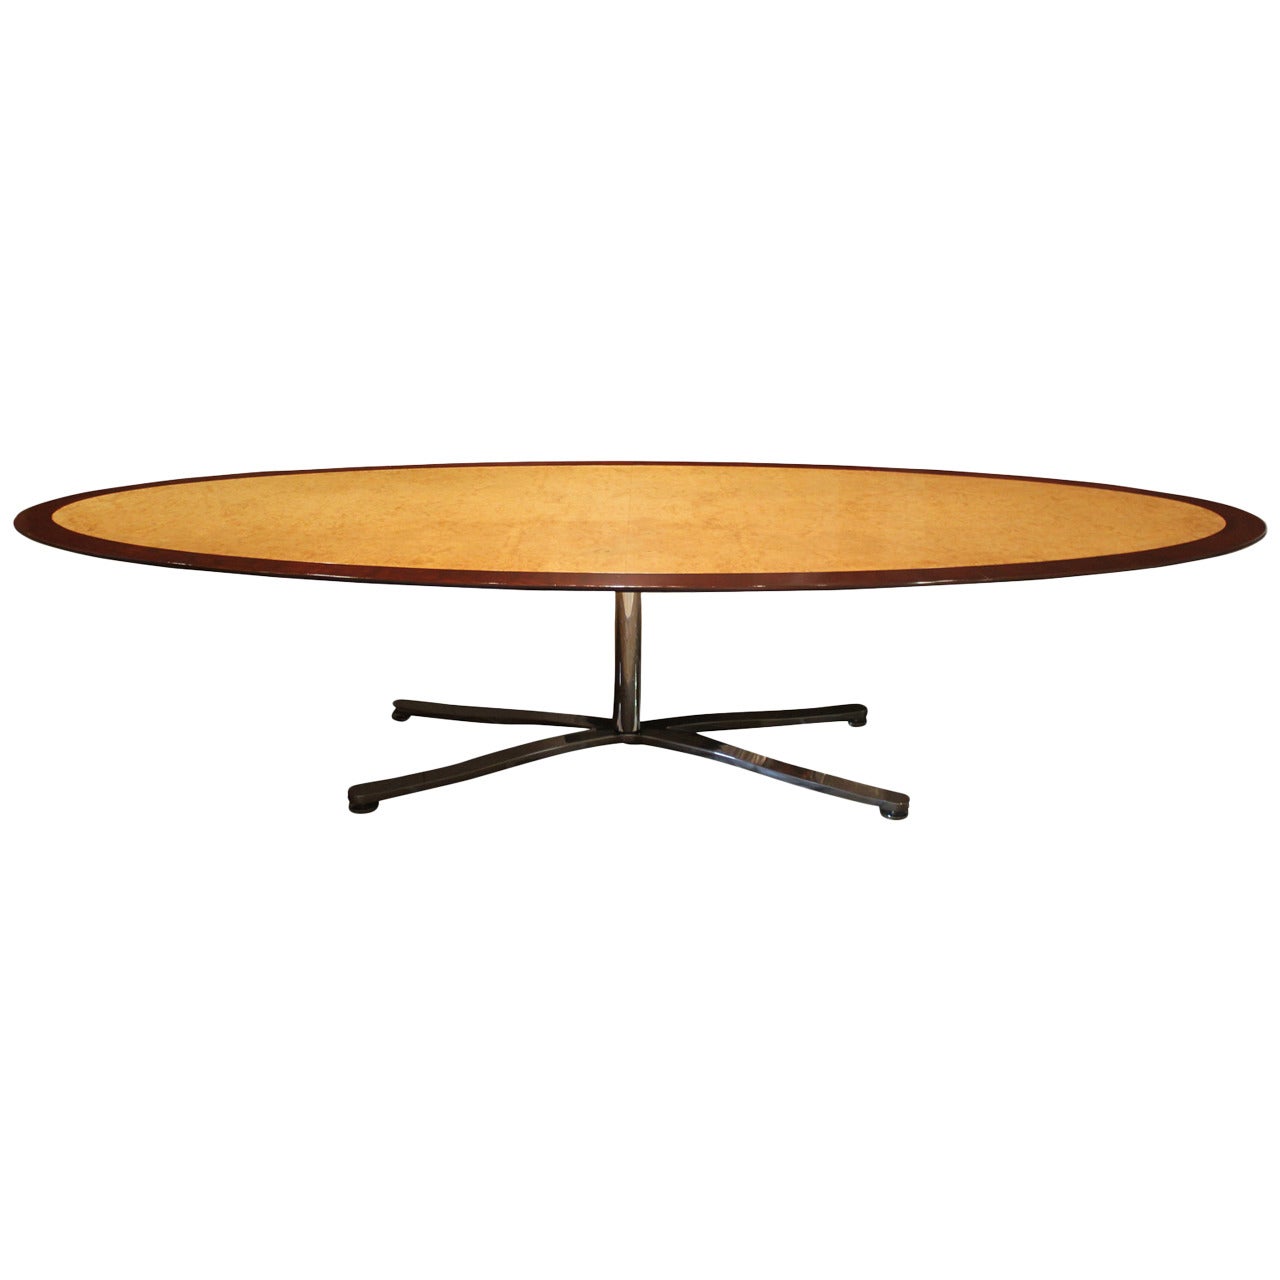 Monumental Zographos Conference or Dining Table with Burl Top and Chrome Base